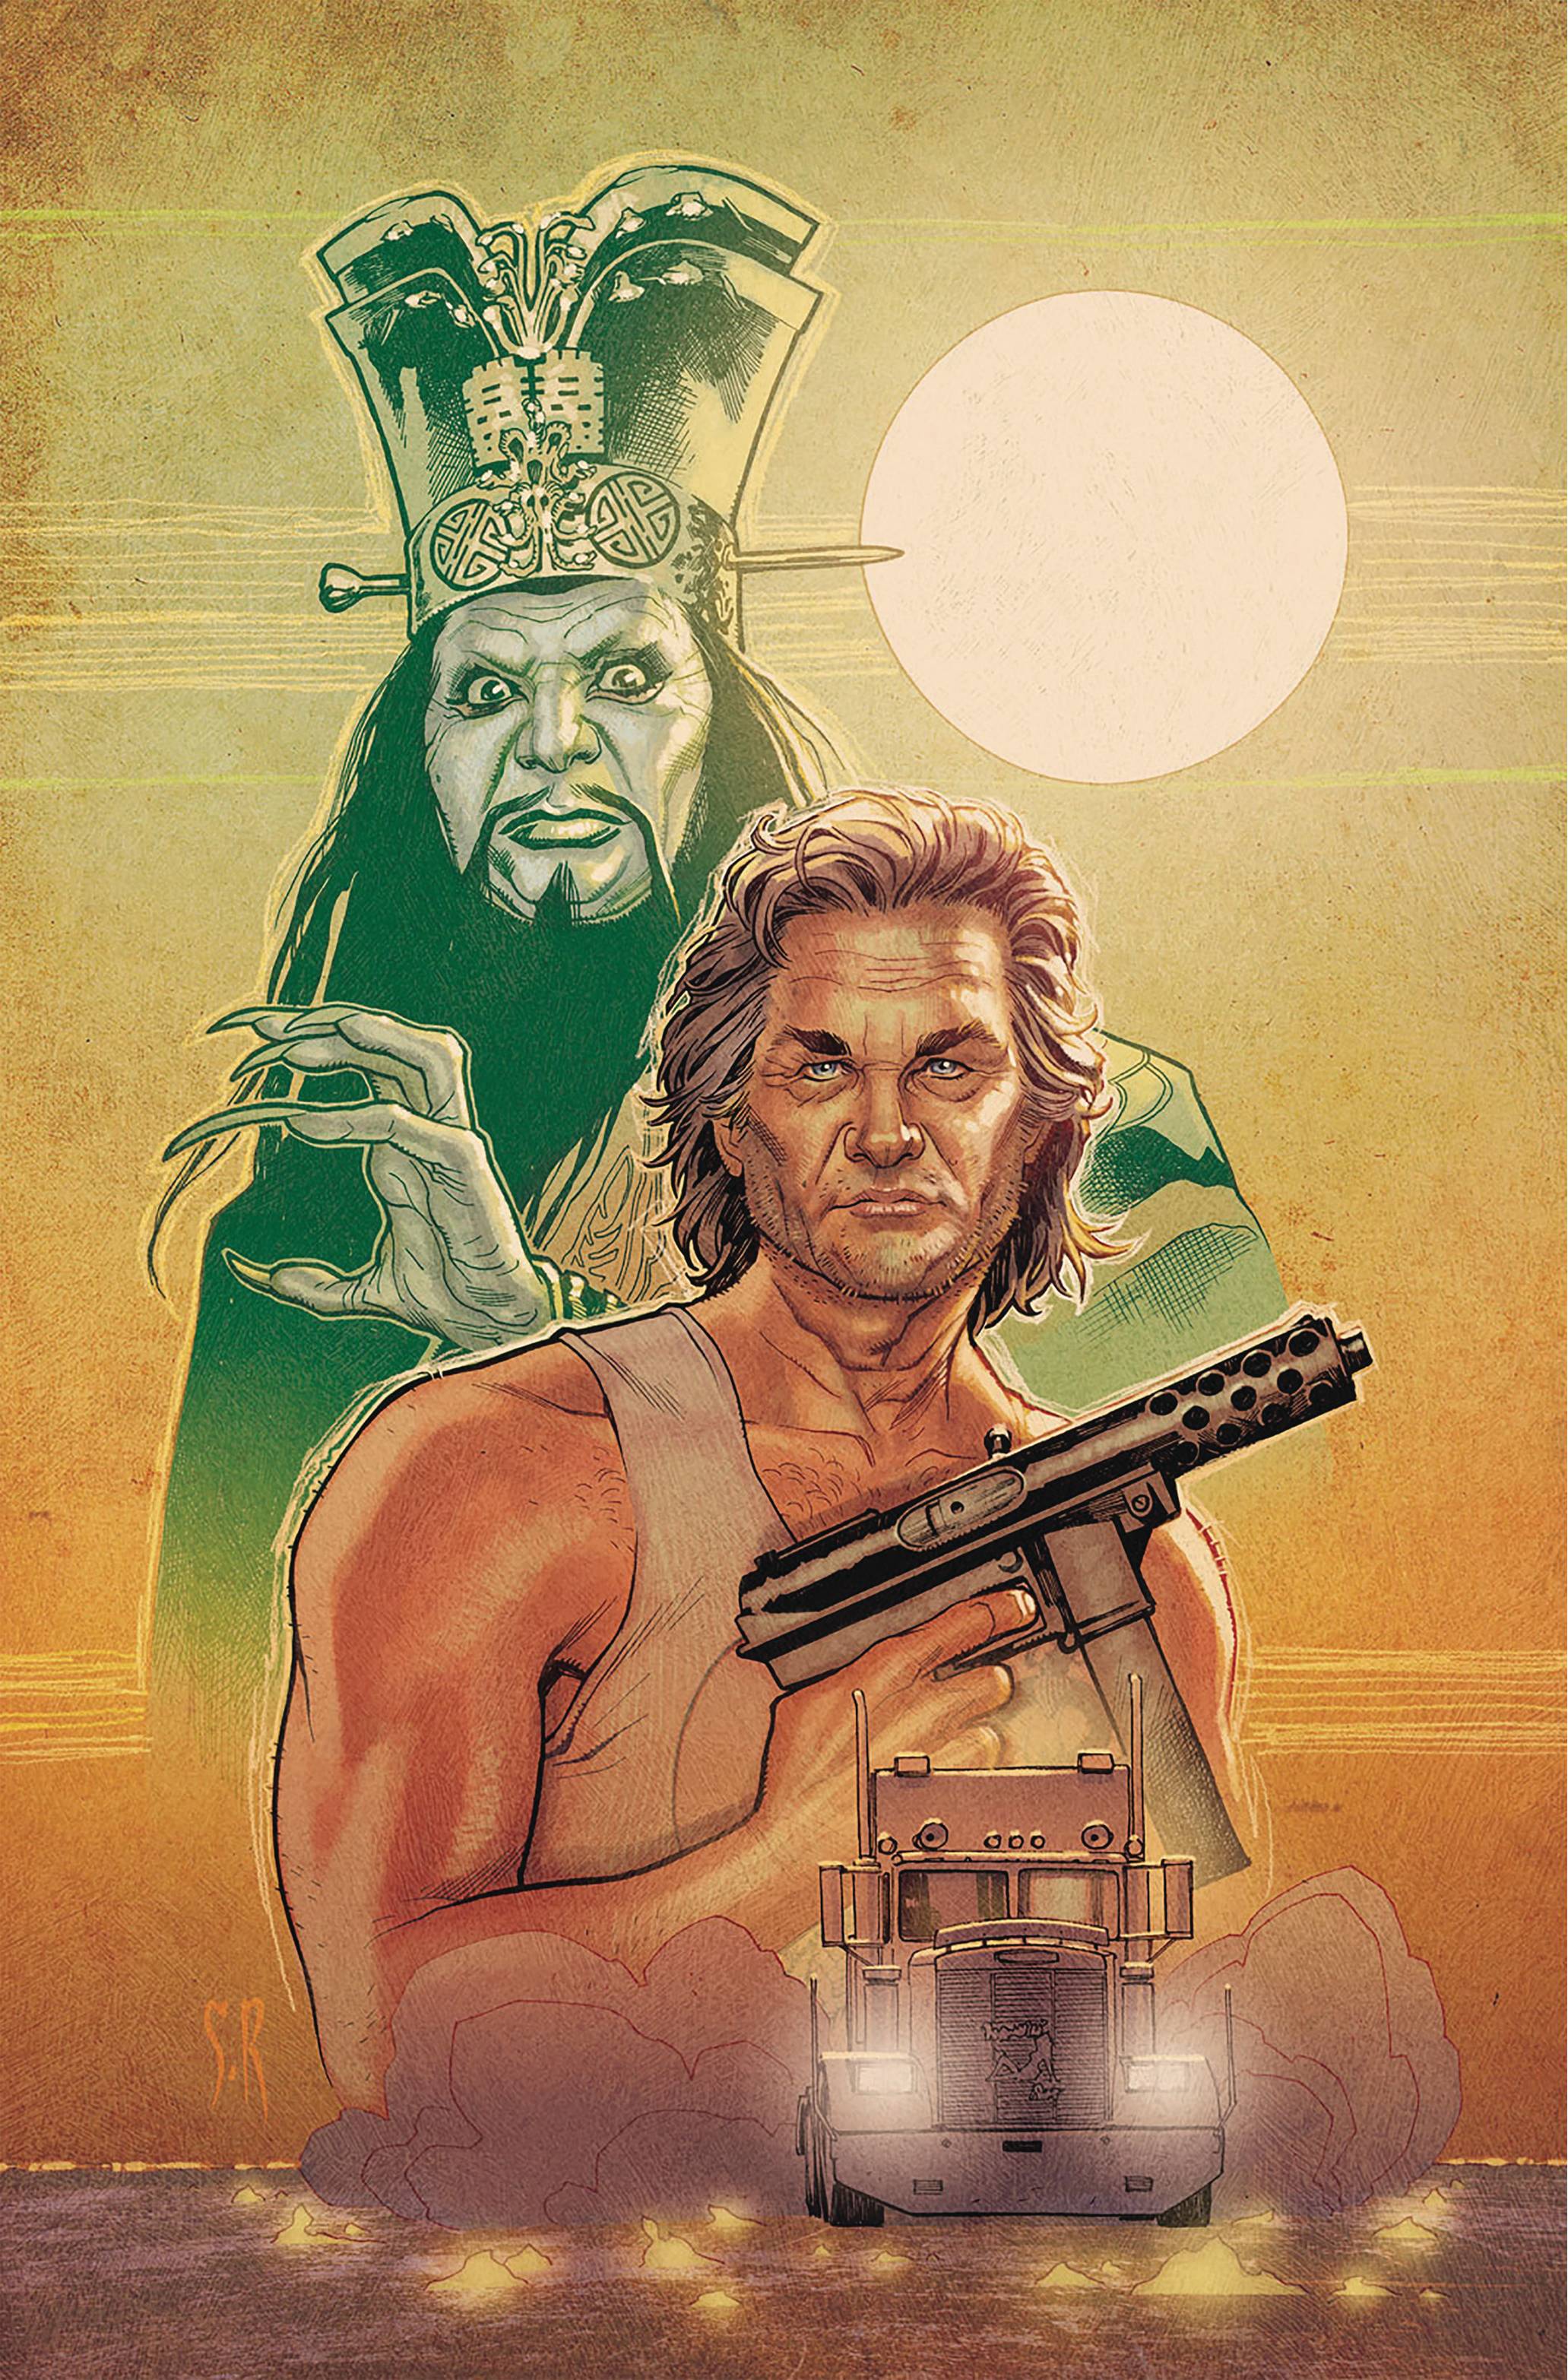 Big Trouble in Little China Old Man Jack #3 Main & Mix